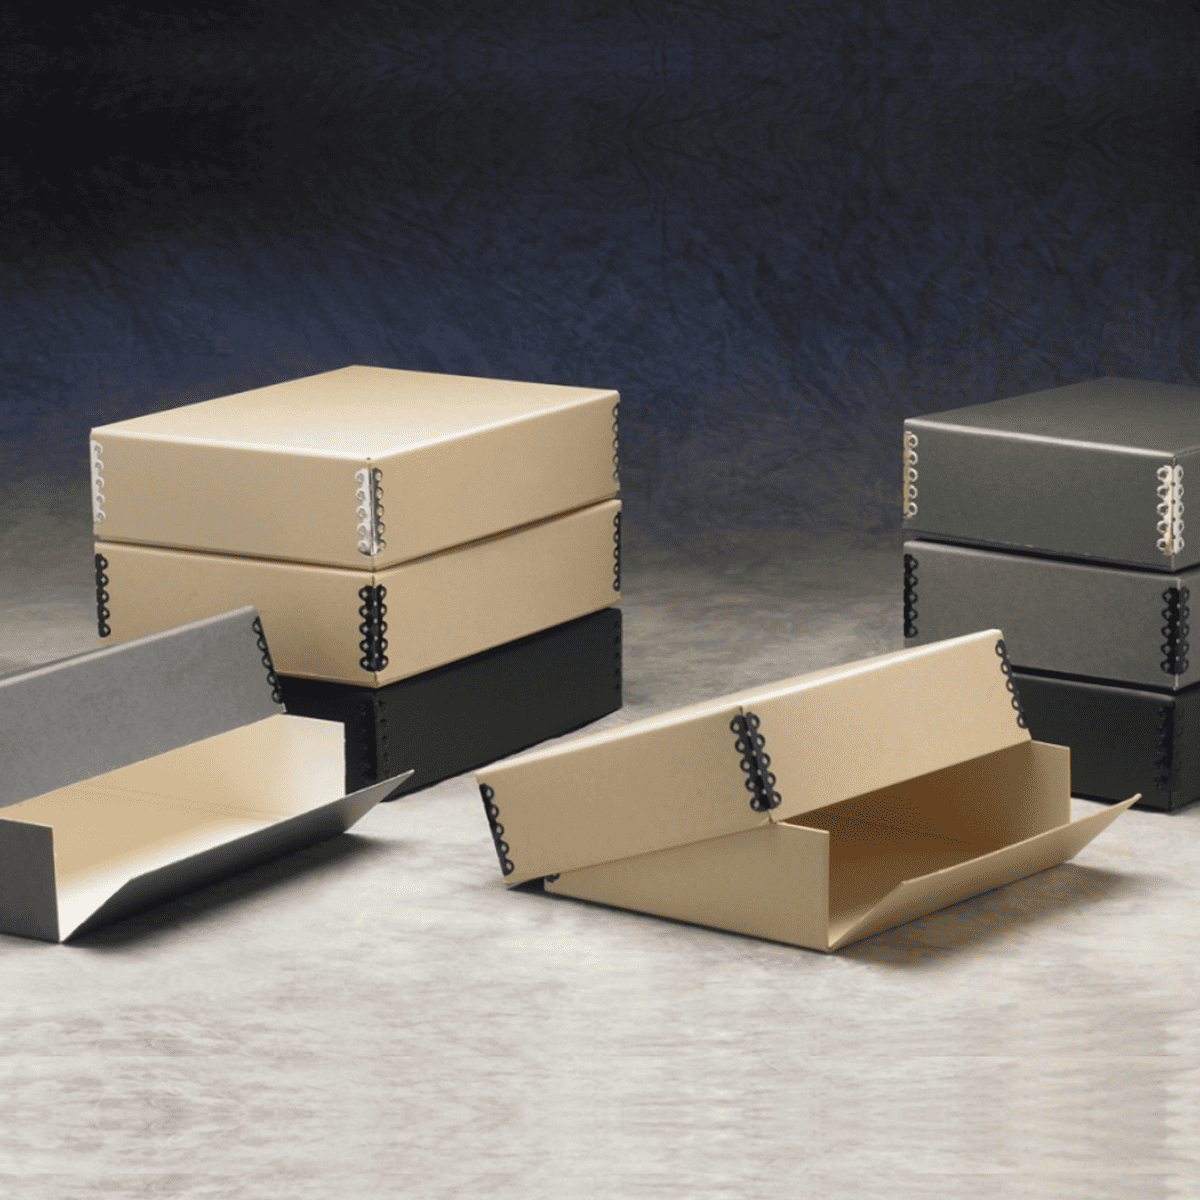 Textile storage boxes manufactured from sturdy, acid free, lignin